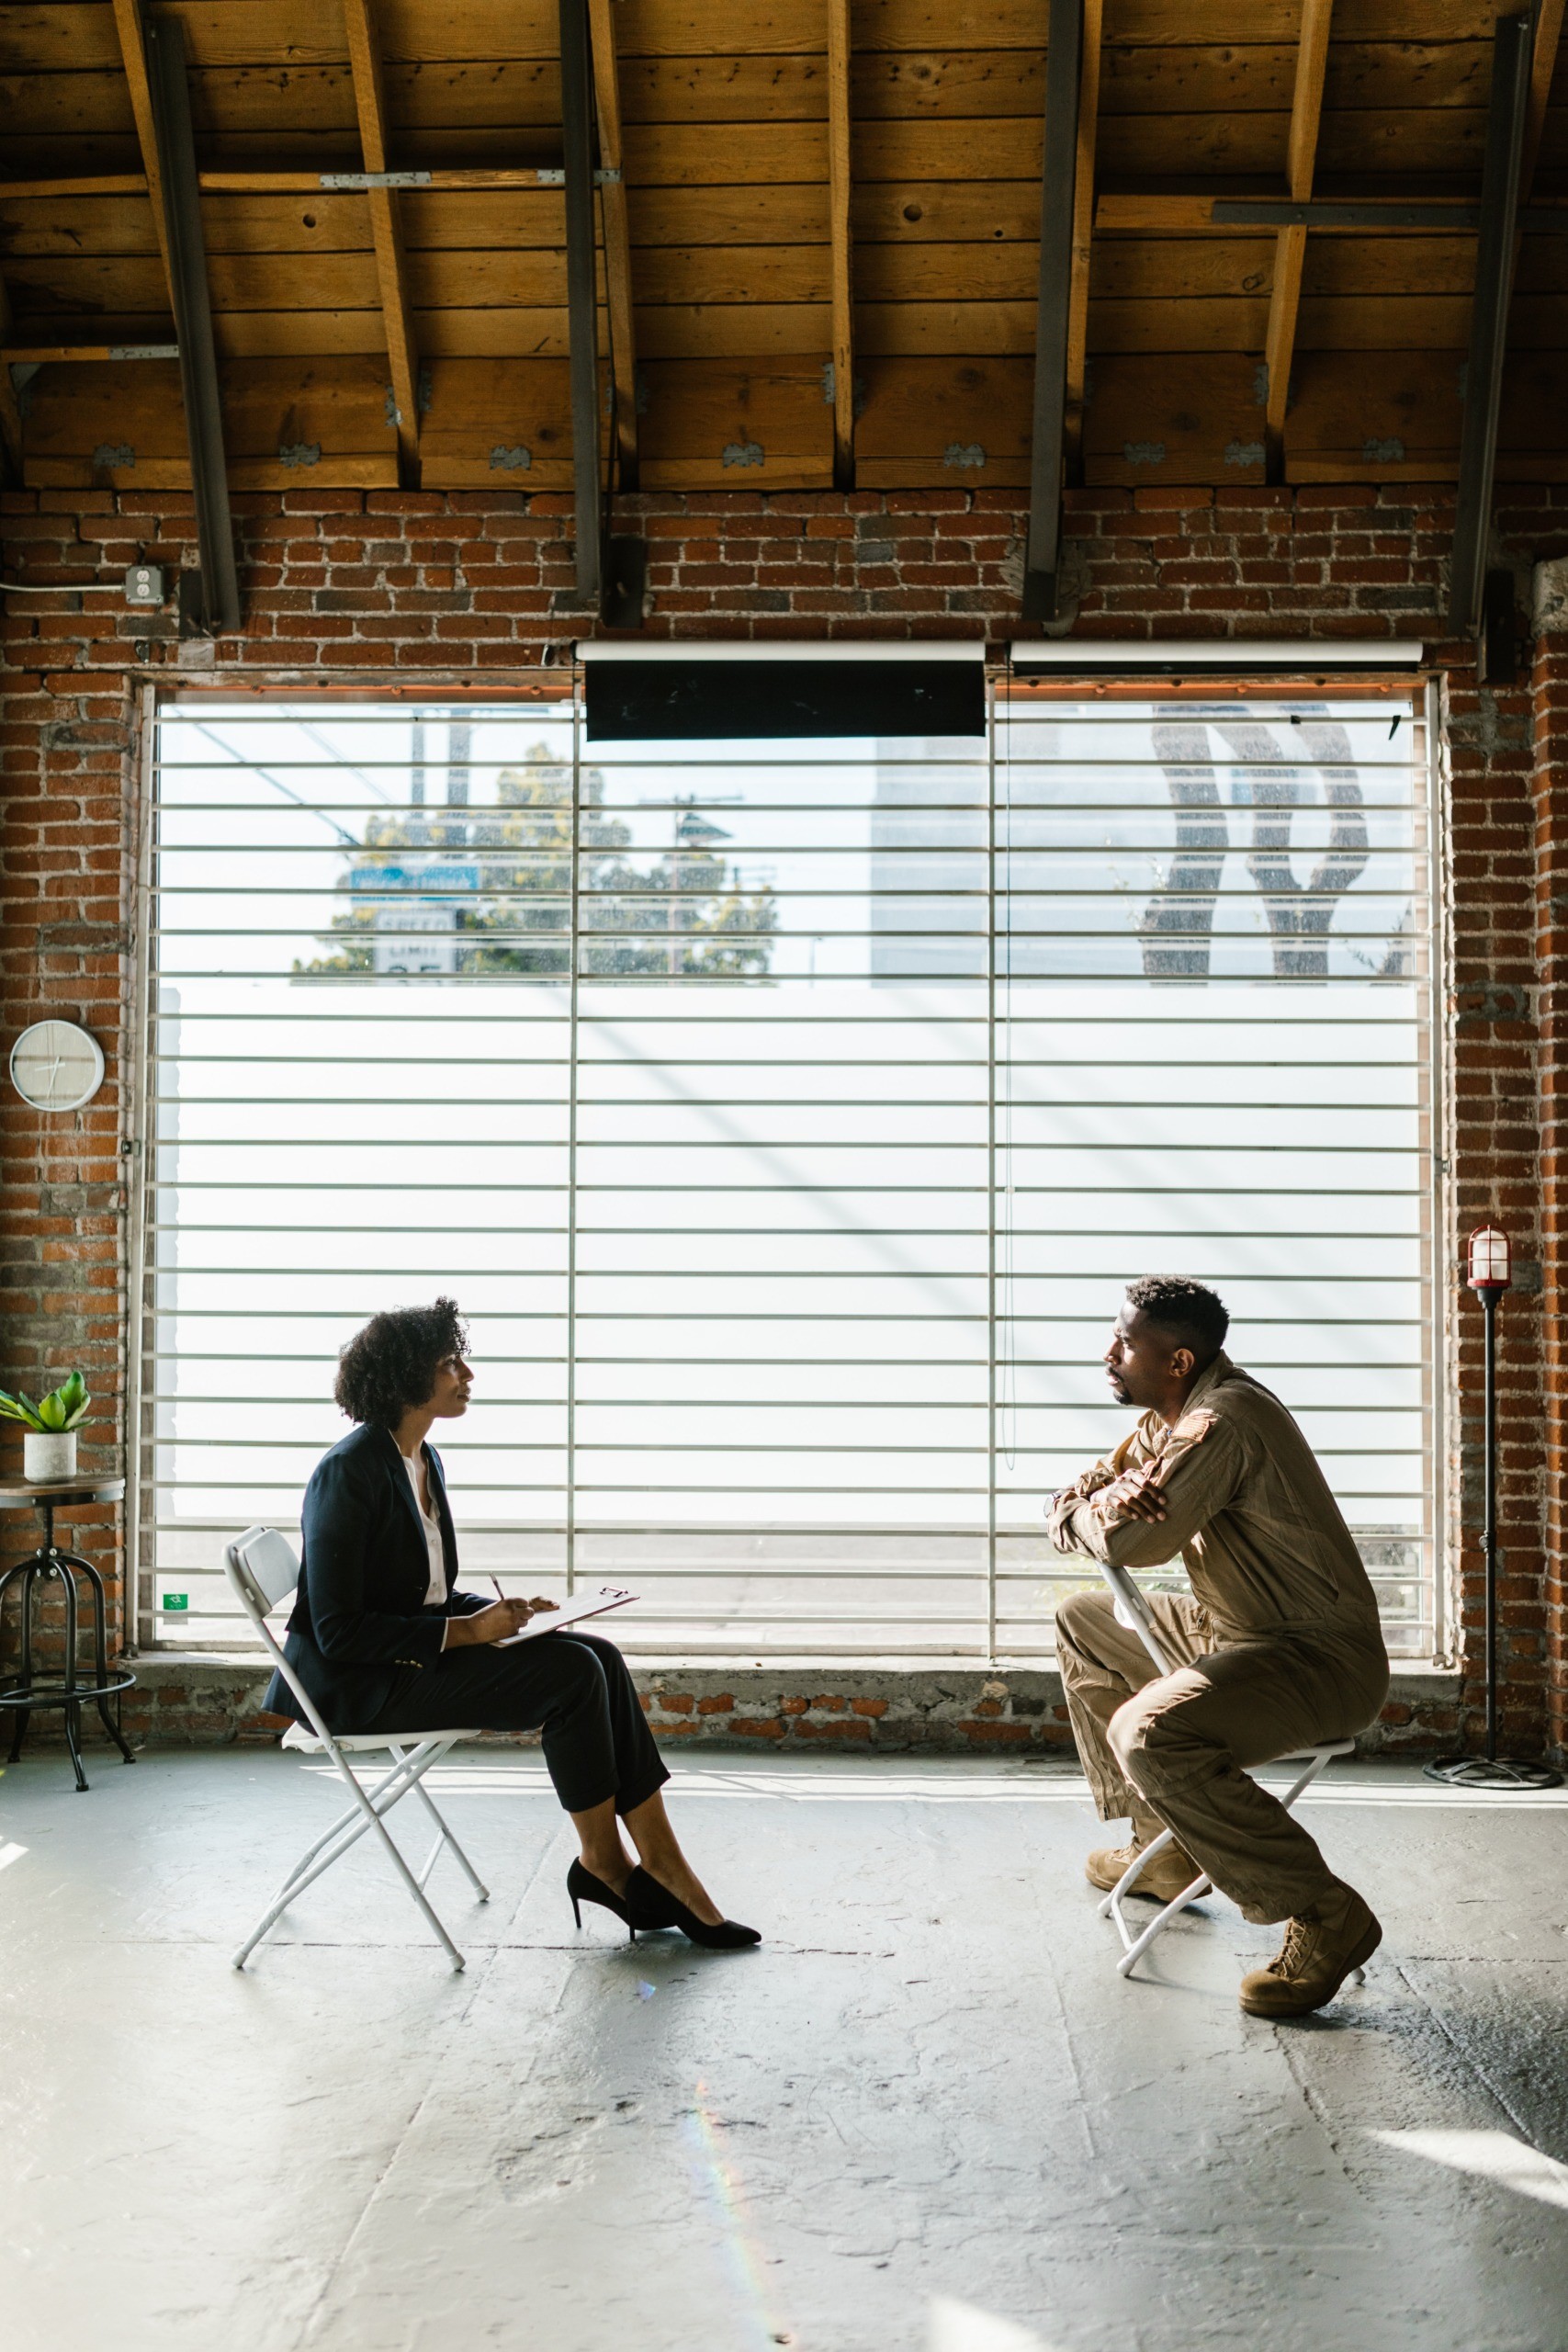 Decorative image of woman and man talking inside in front of a large window, both on chairs. pic by Rodnae Productions courtesy of pexels.